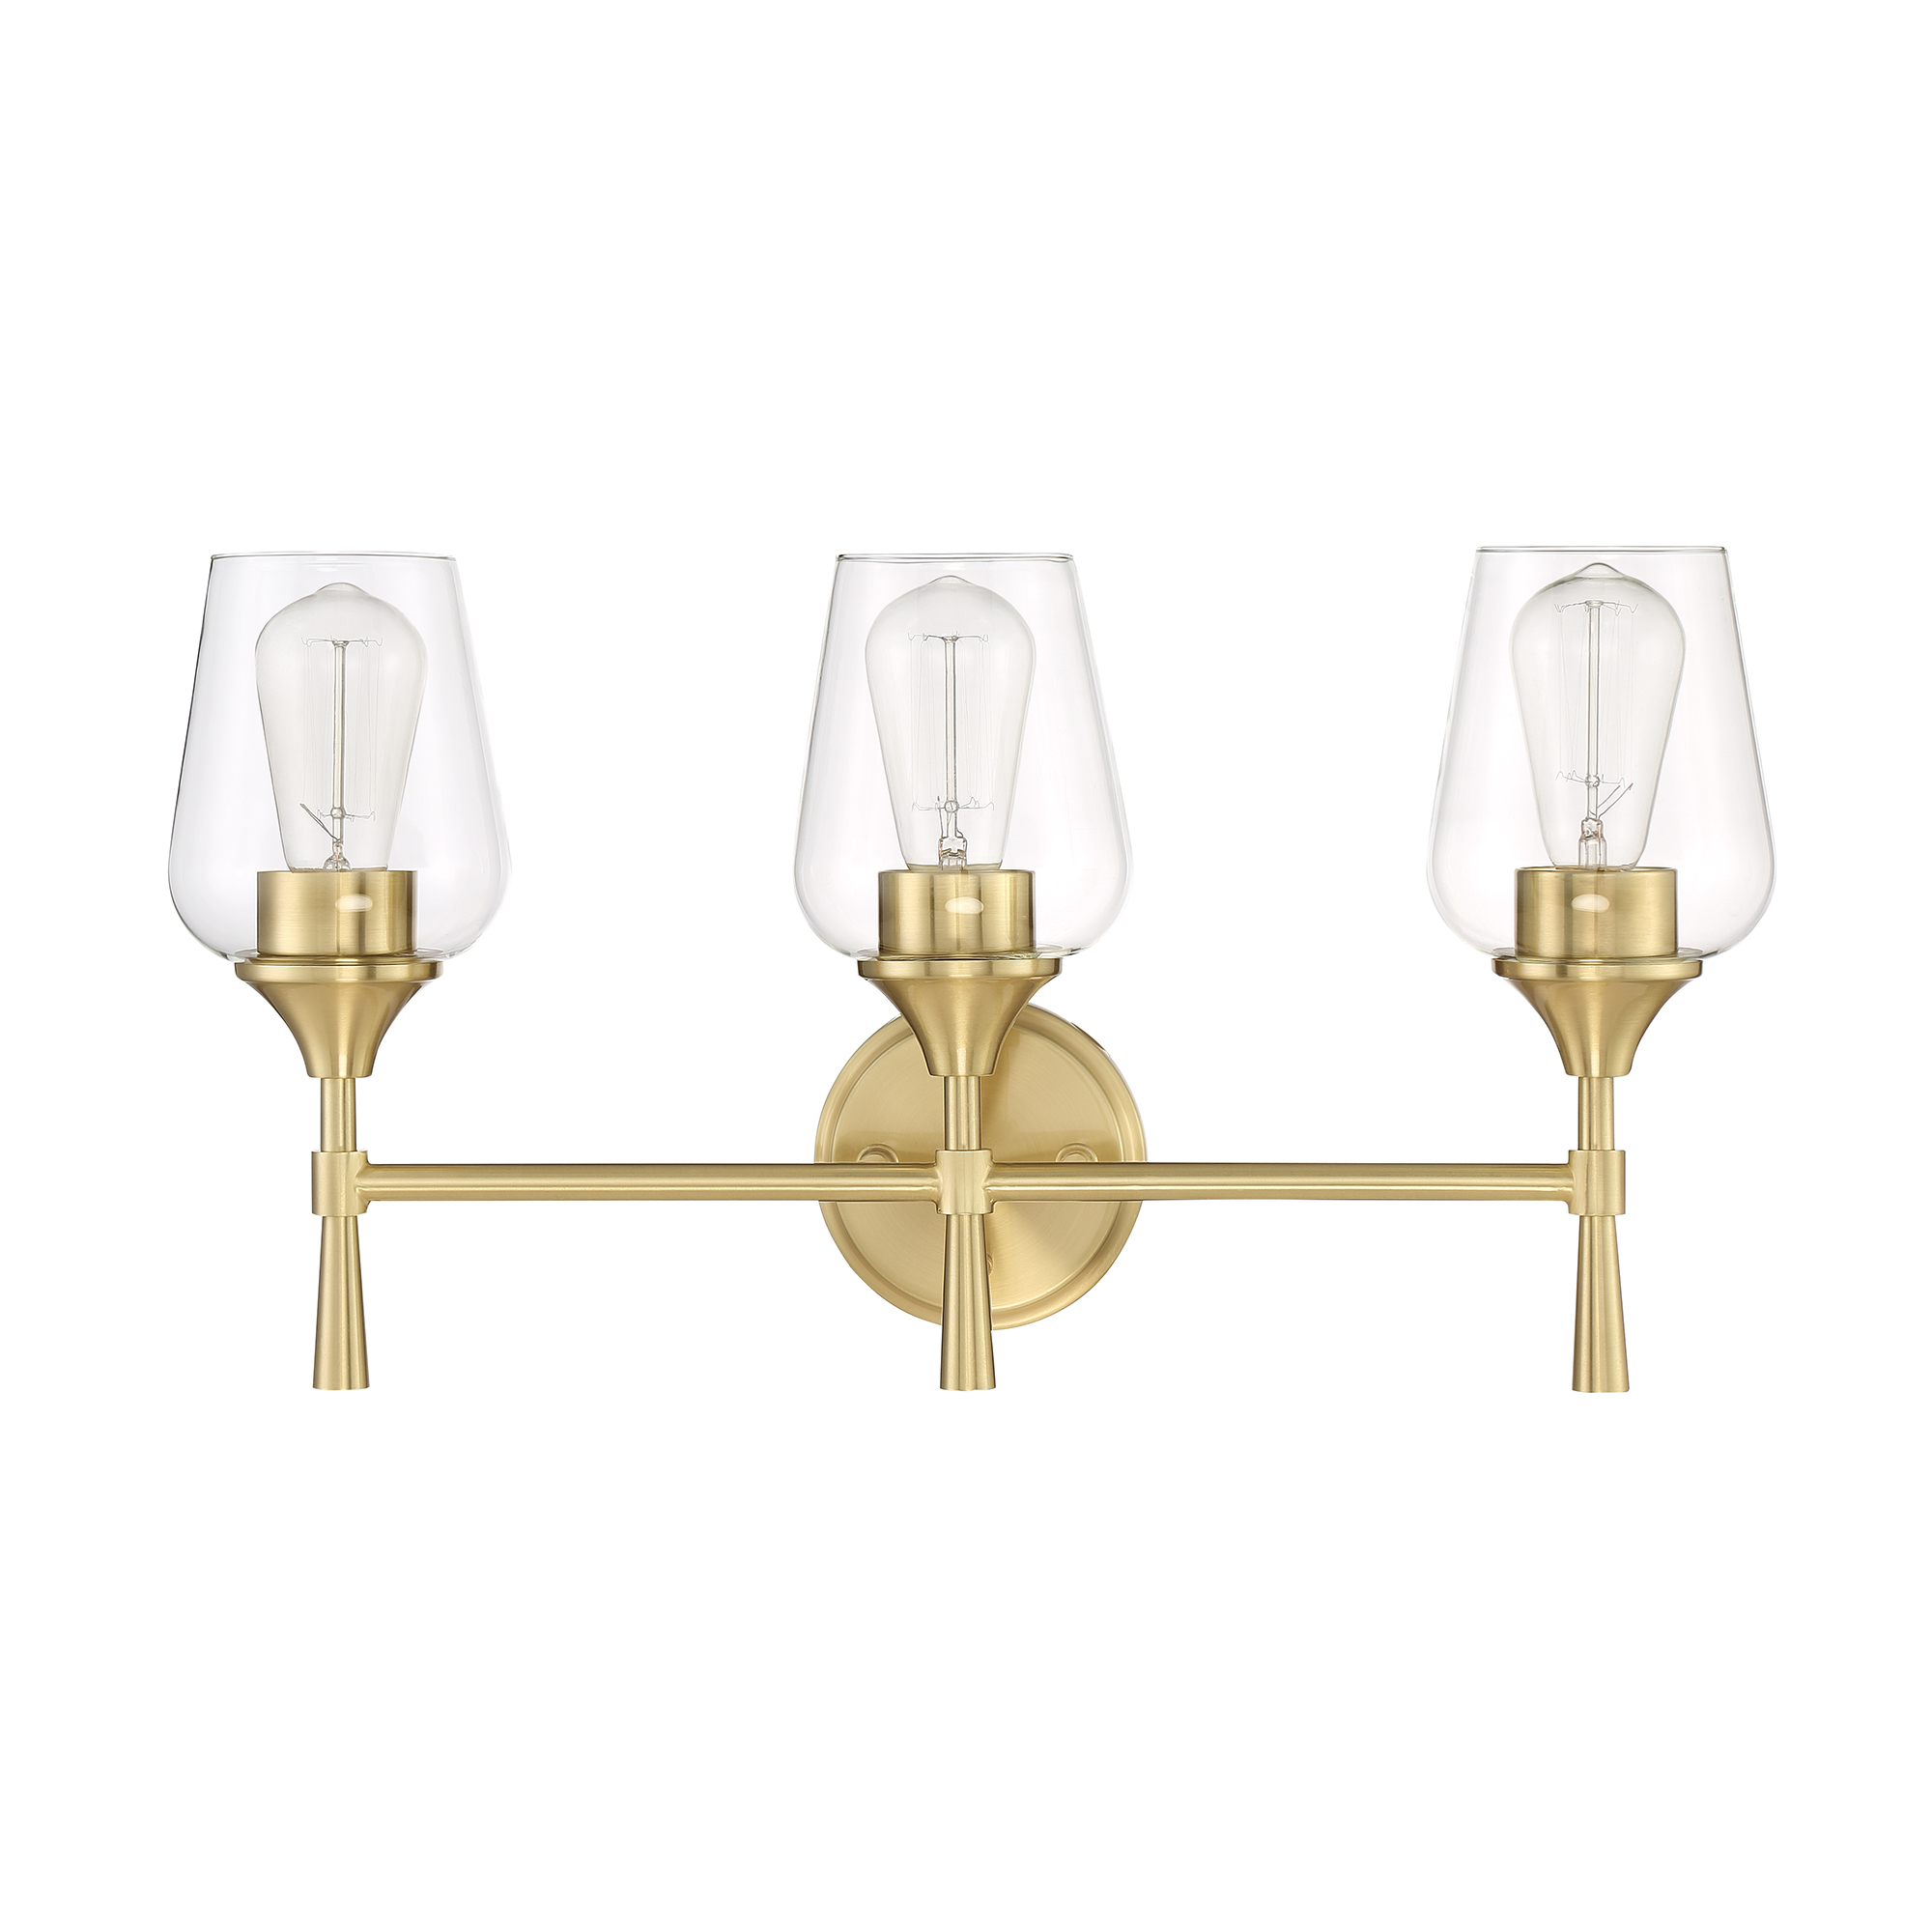 Sunset Lighting Three Light Stella Vanity - Clear Glass - with Champagne Gold Finish